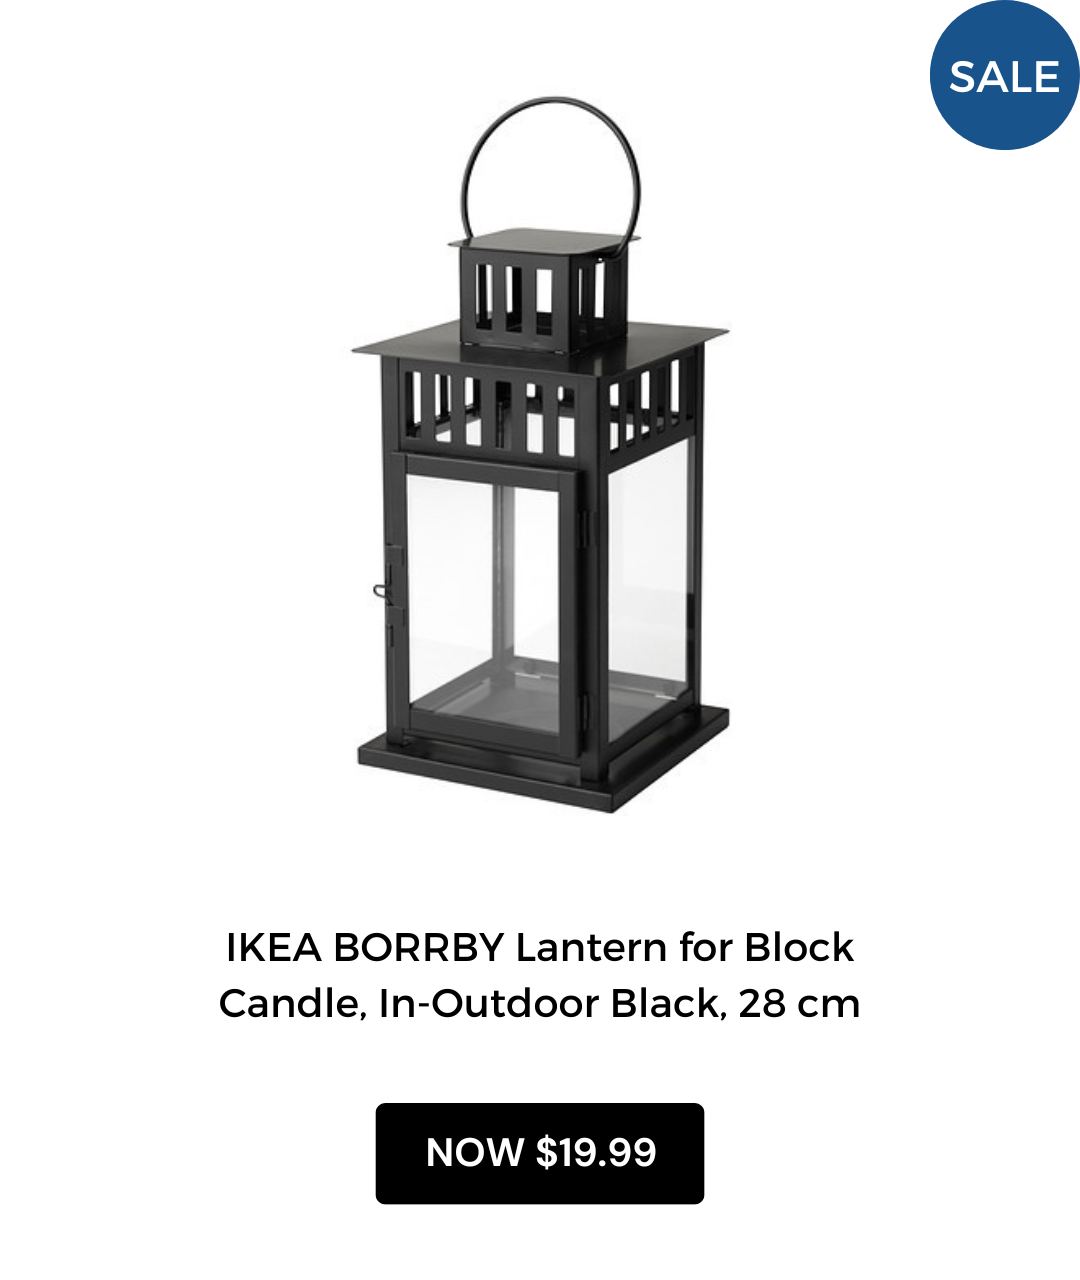 IKEA BORRBY Lantern for Block Candle, In-Outdoor Black, 28 cm